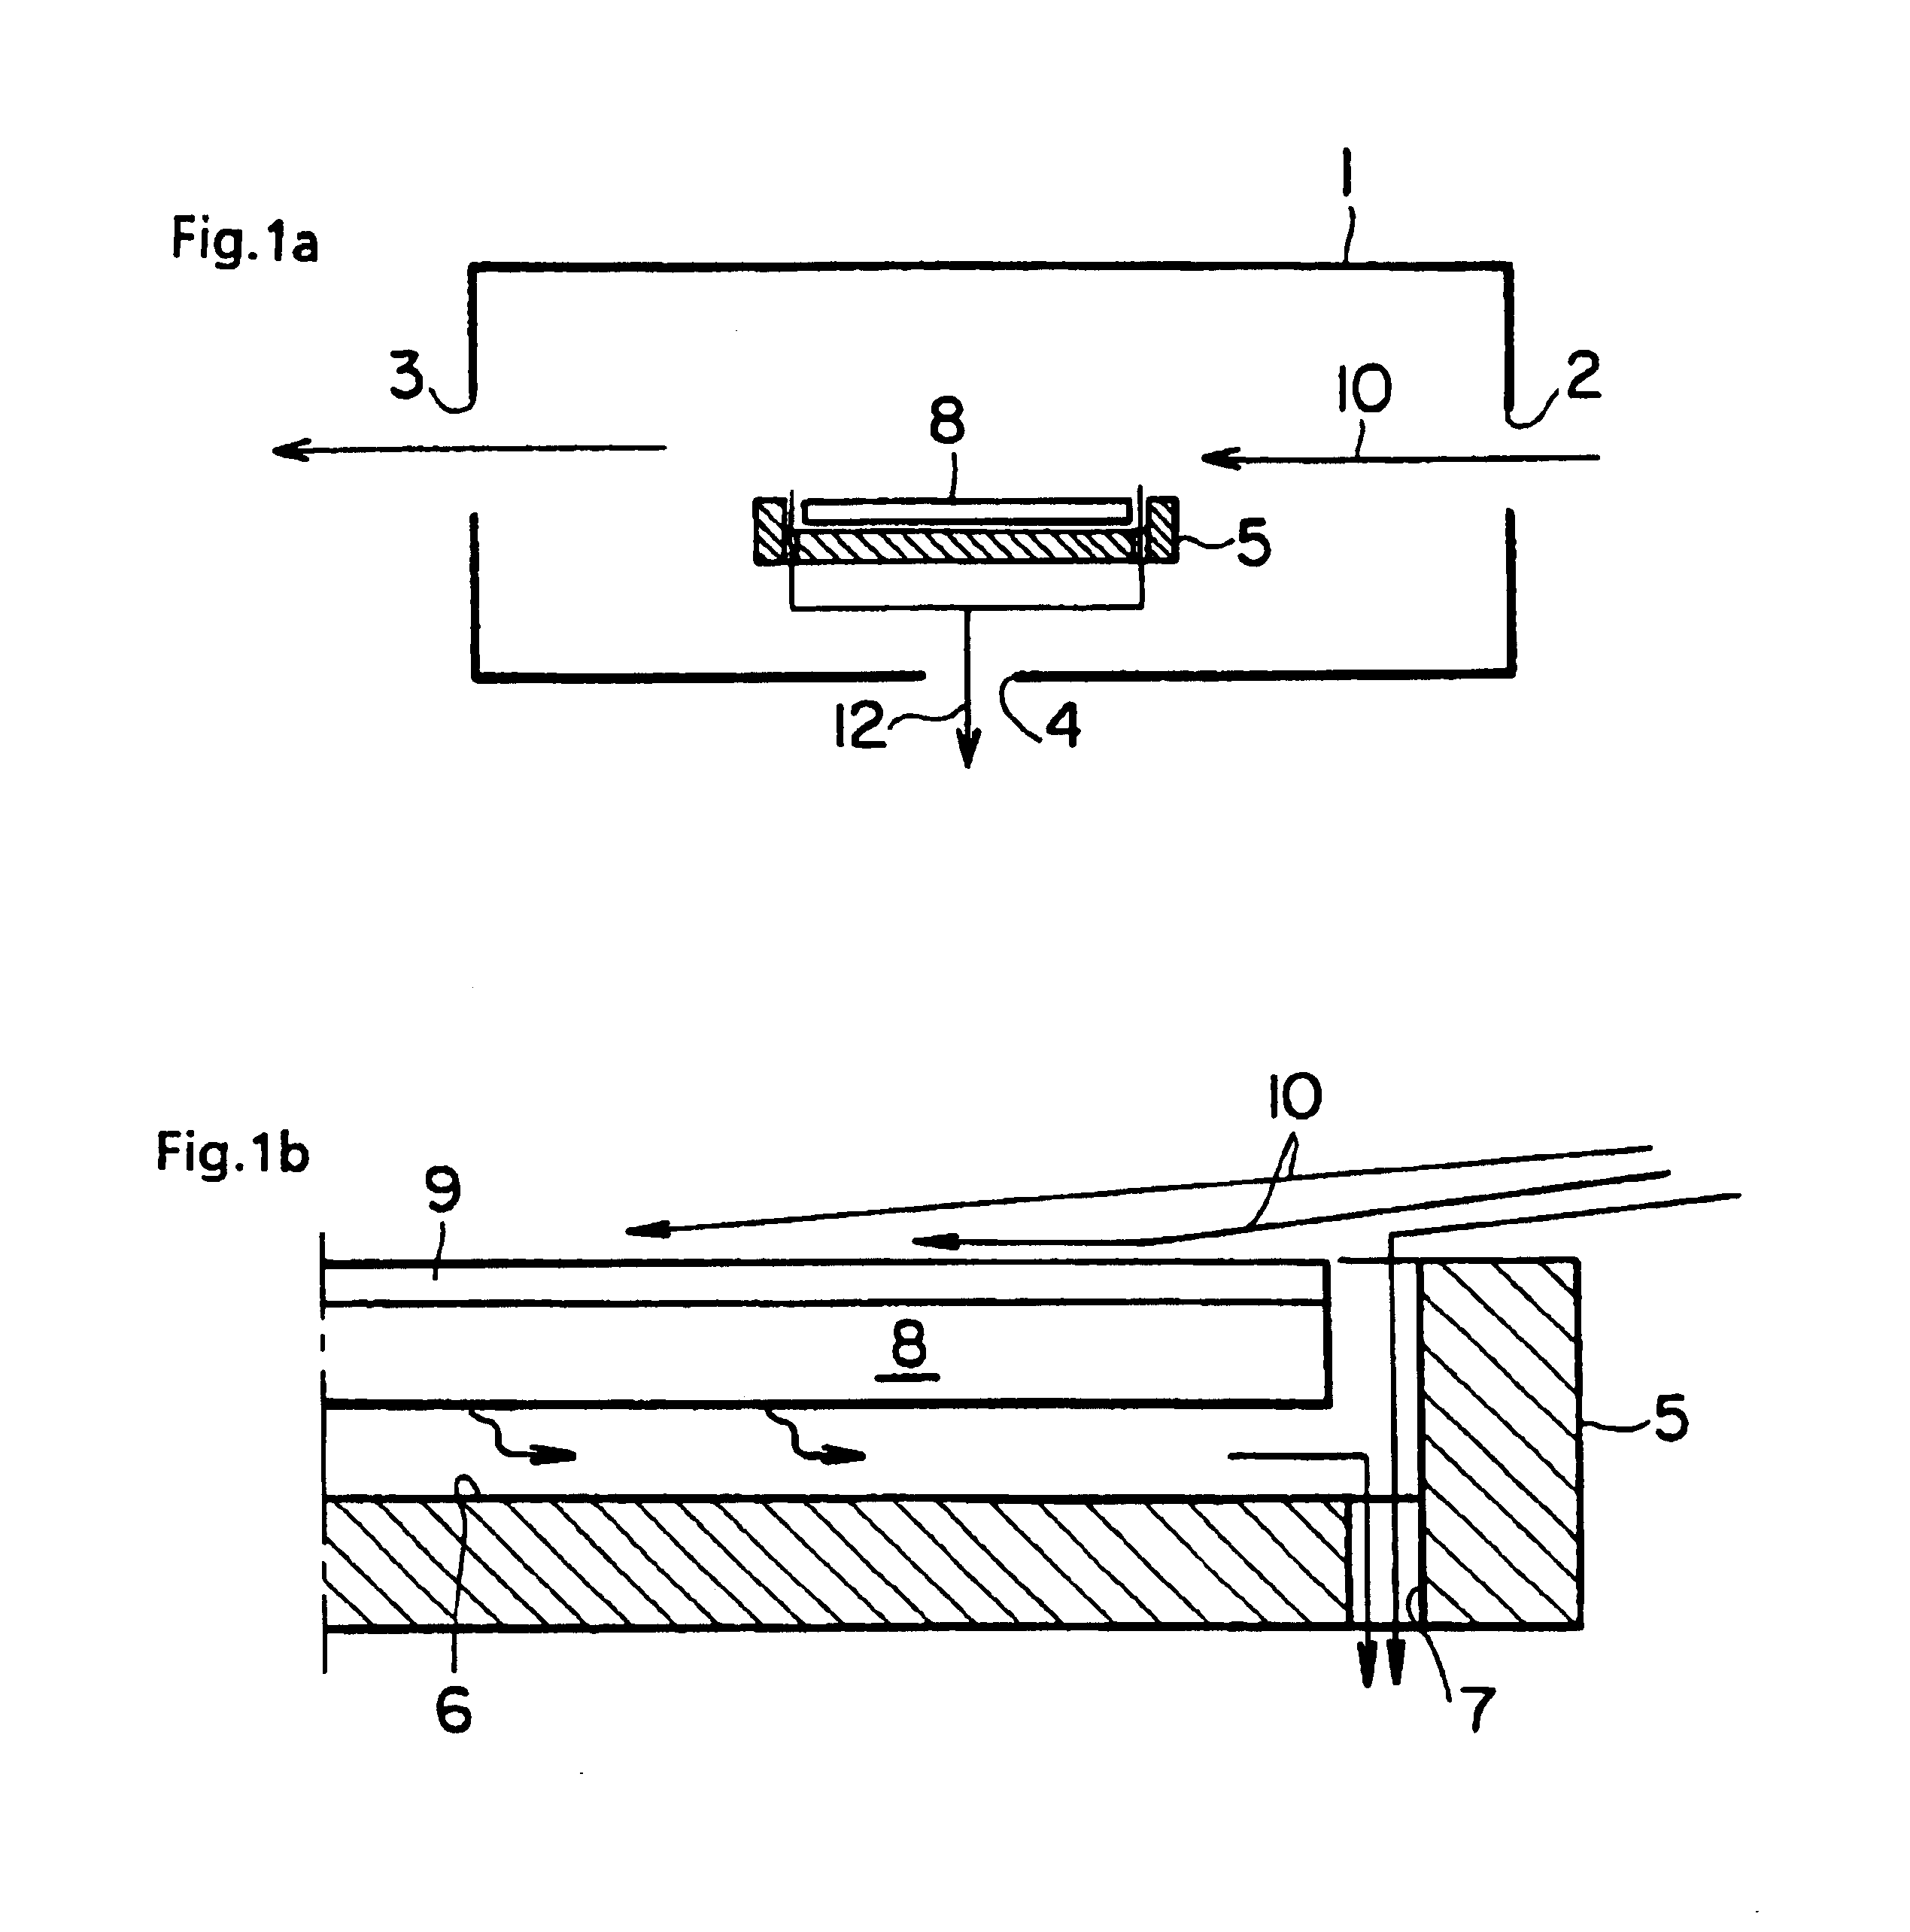 Susceptor for vapor-phase growth apparatus